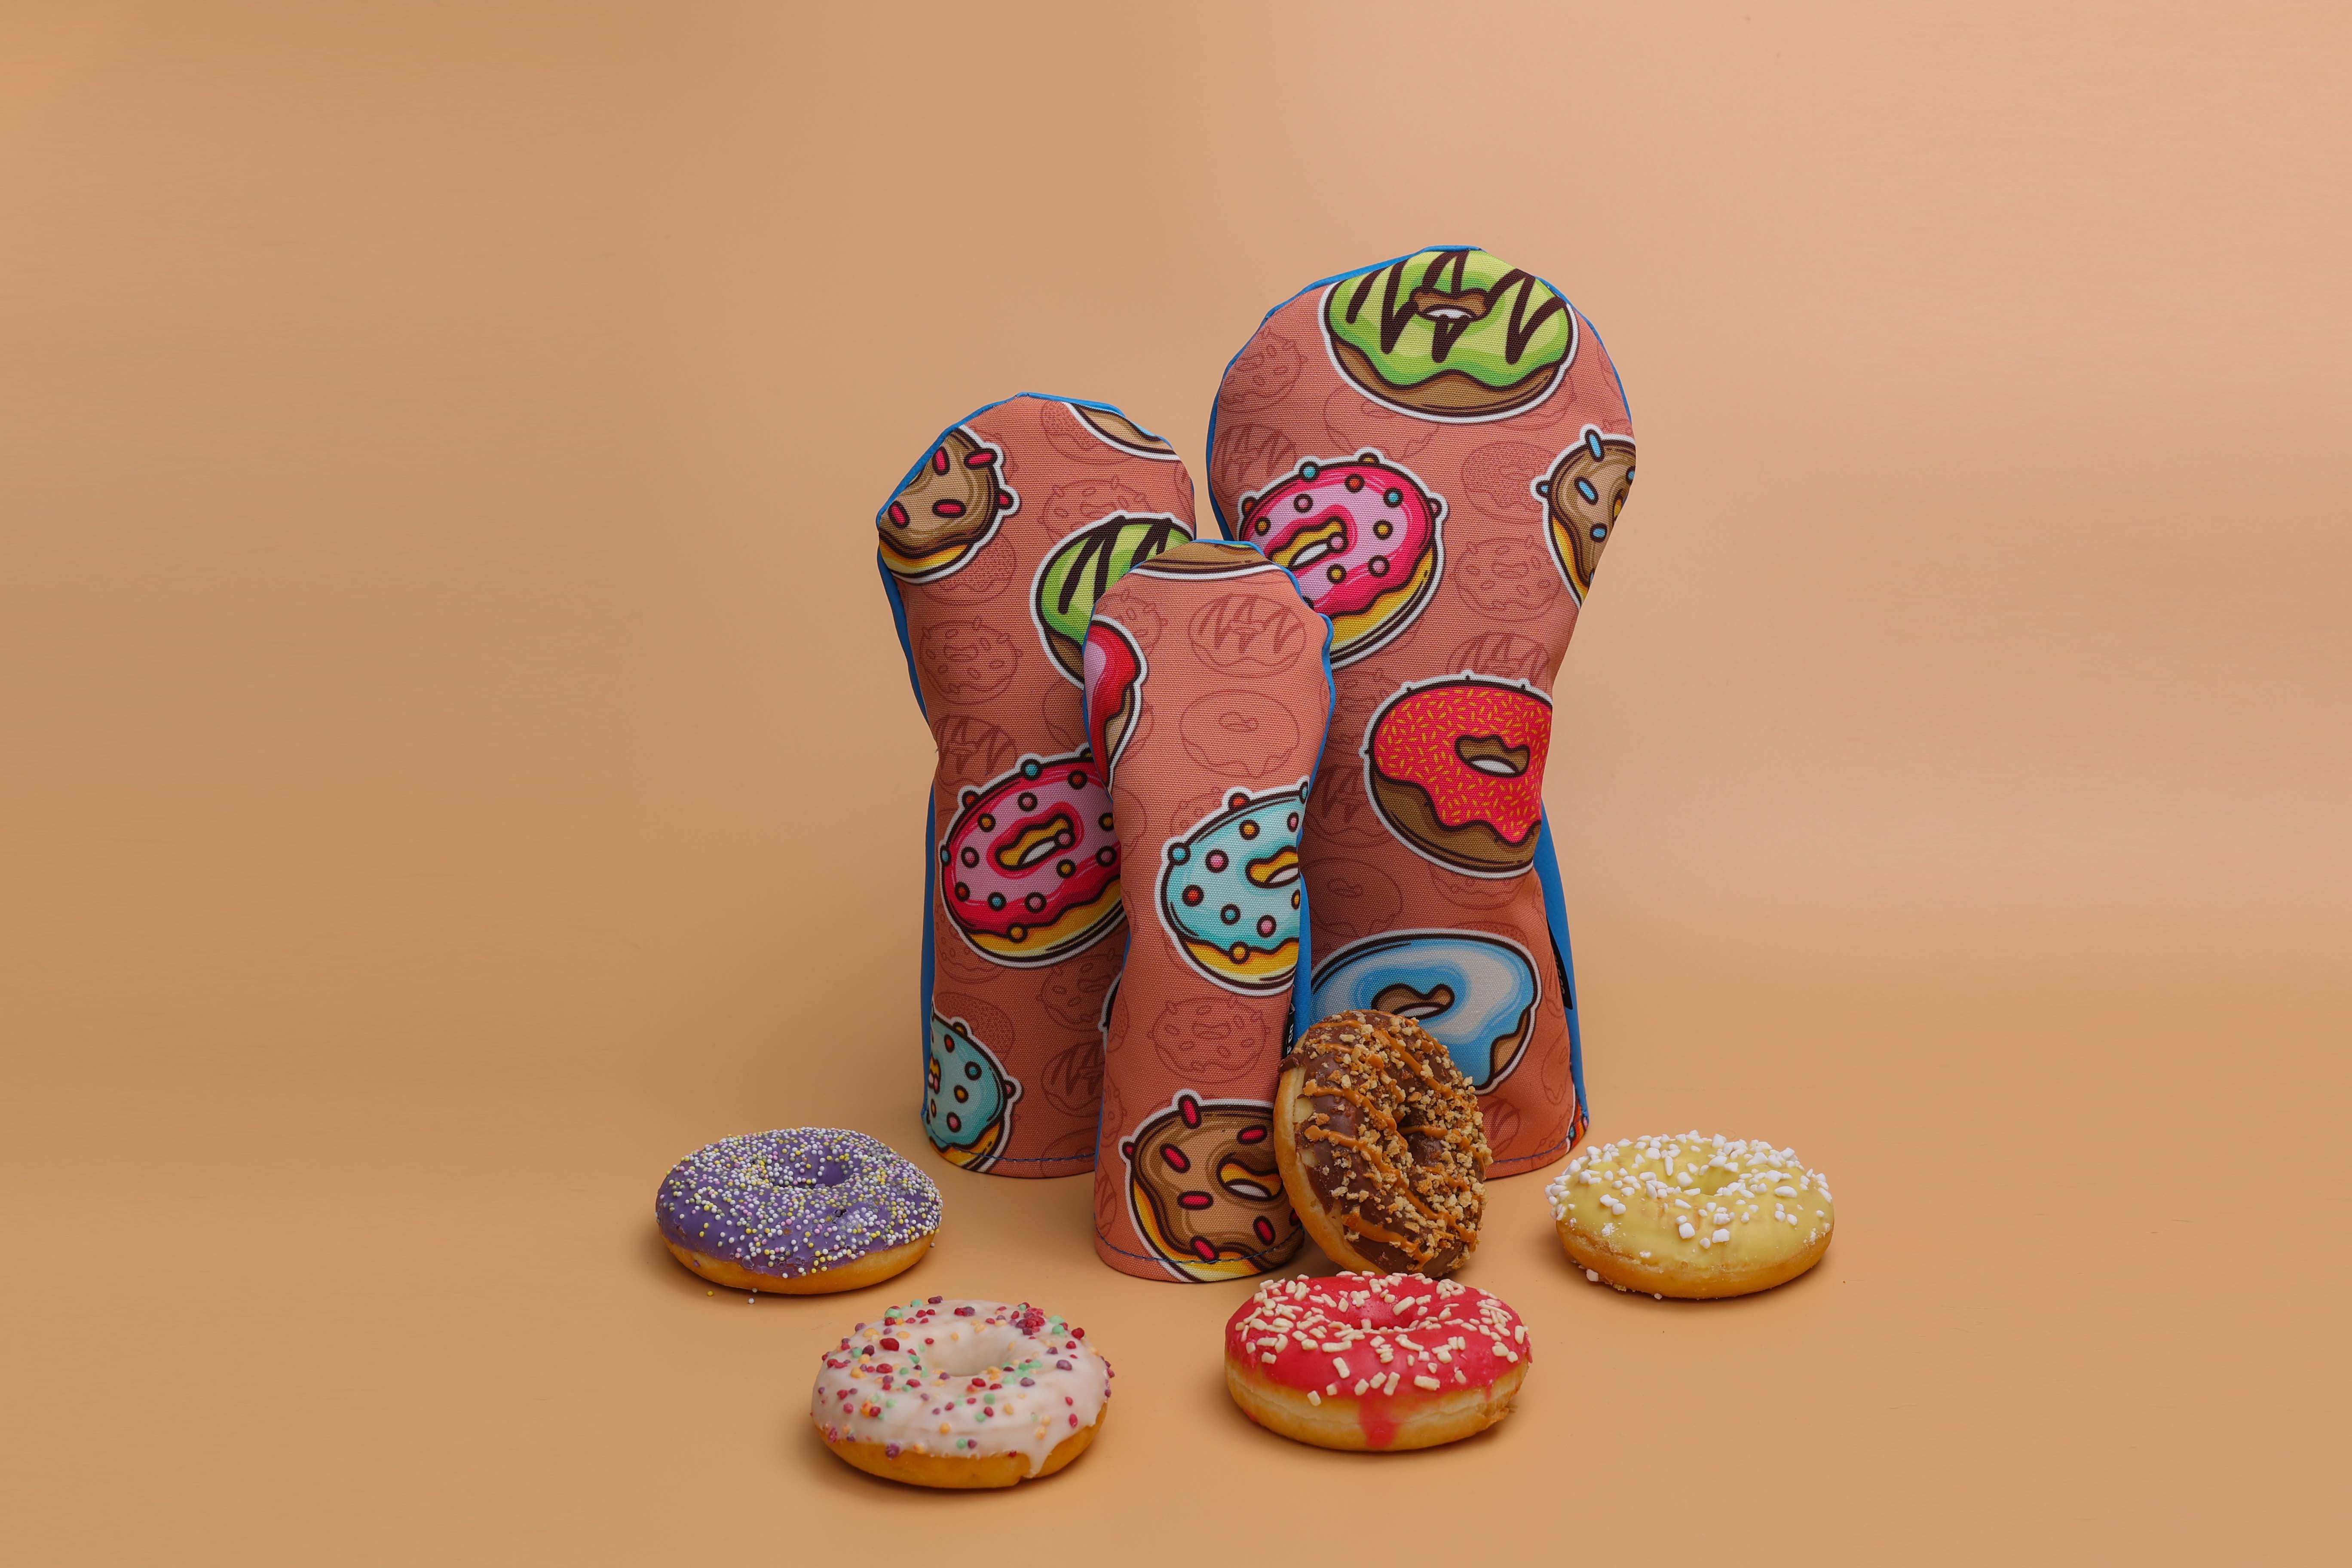 Donut style headcovers